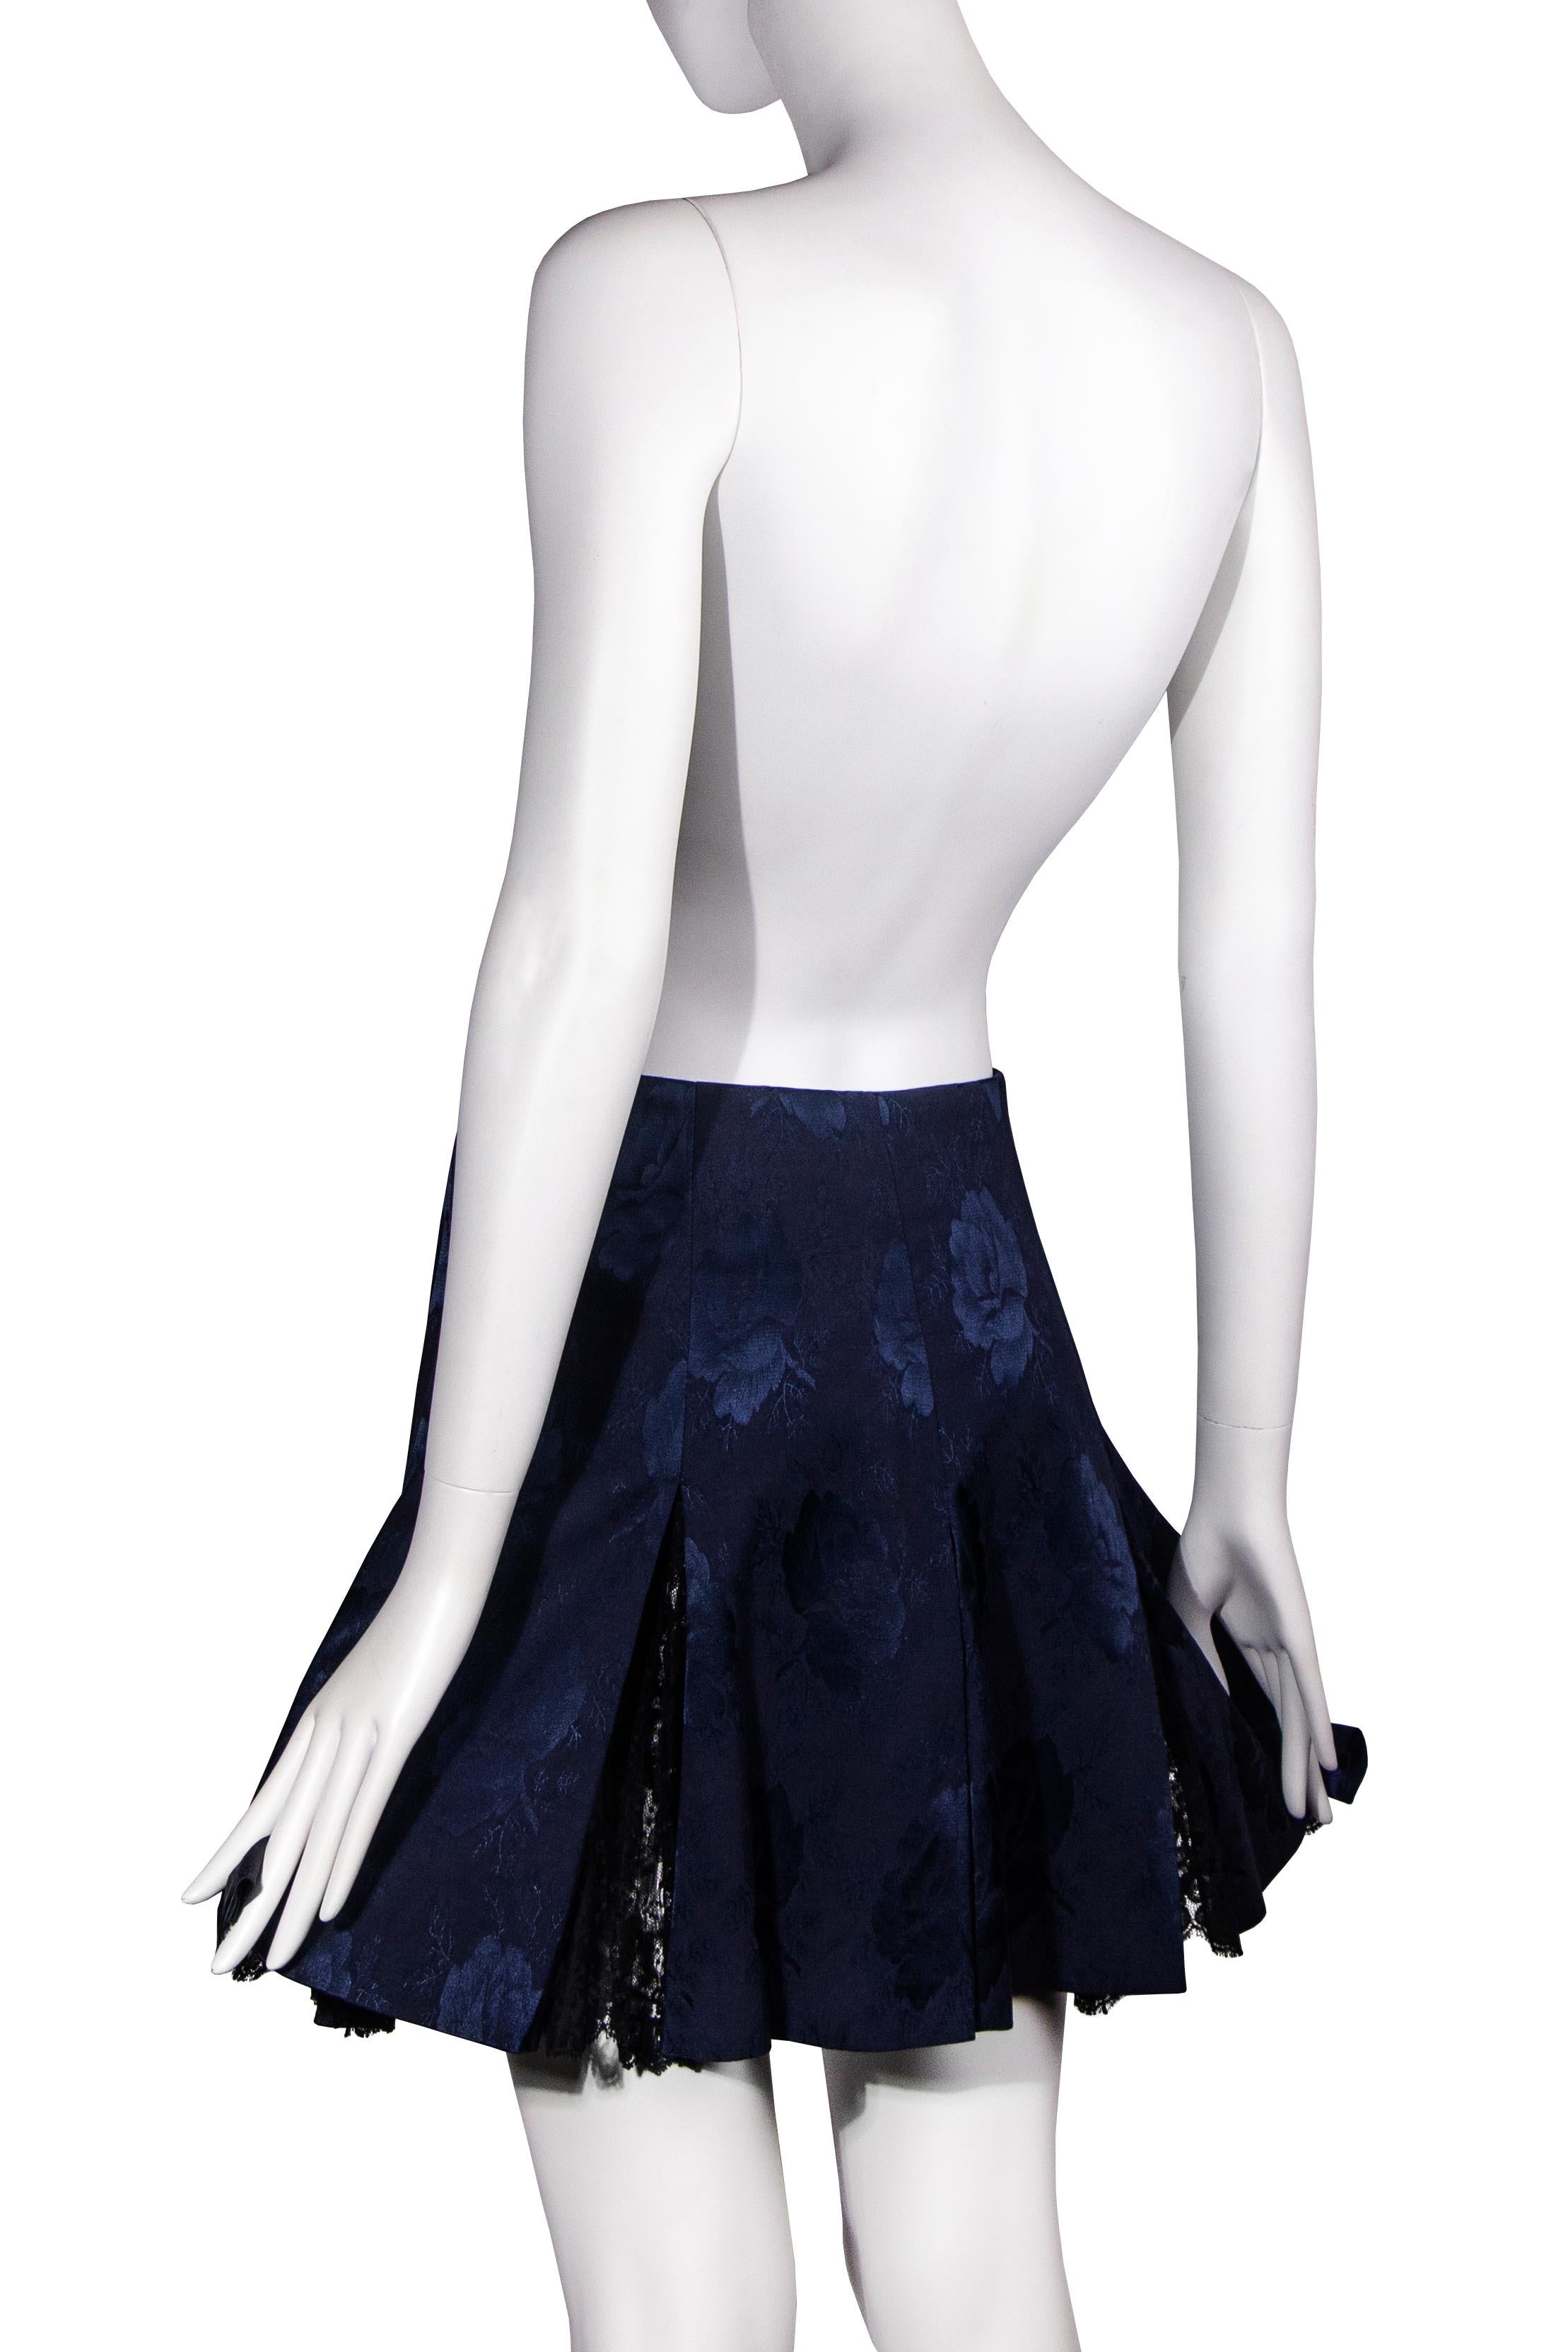 Christian Dior by John Galliano navy silk brocade & lace skirt, fw 1997 For Sale 6